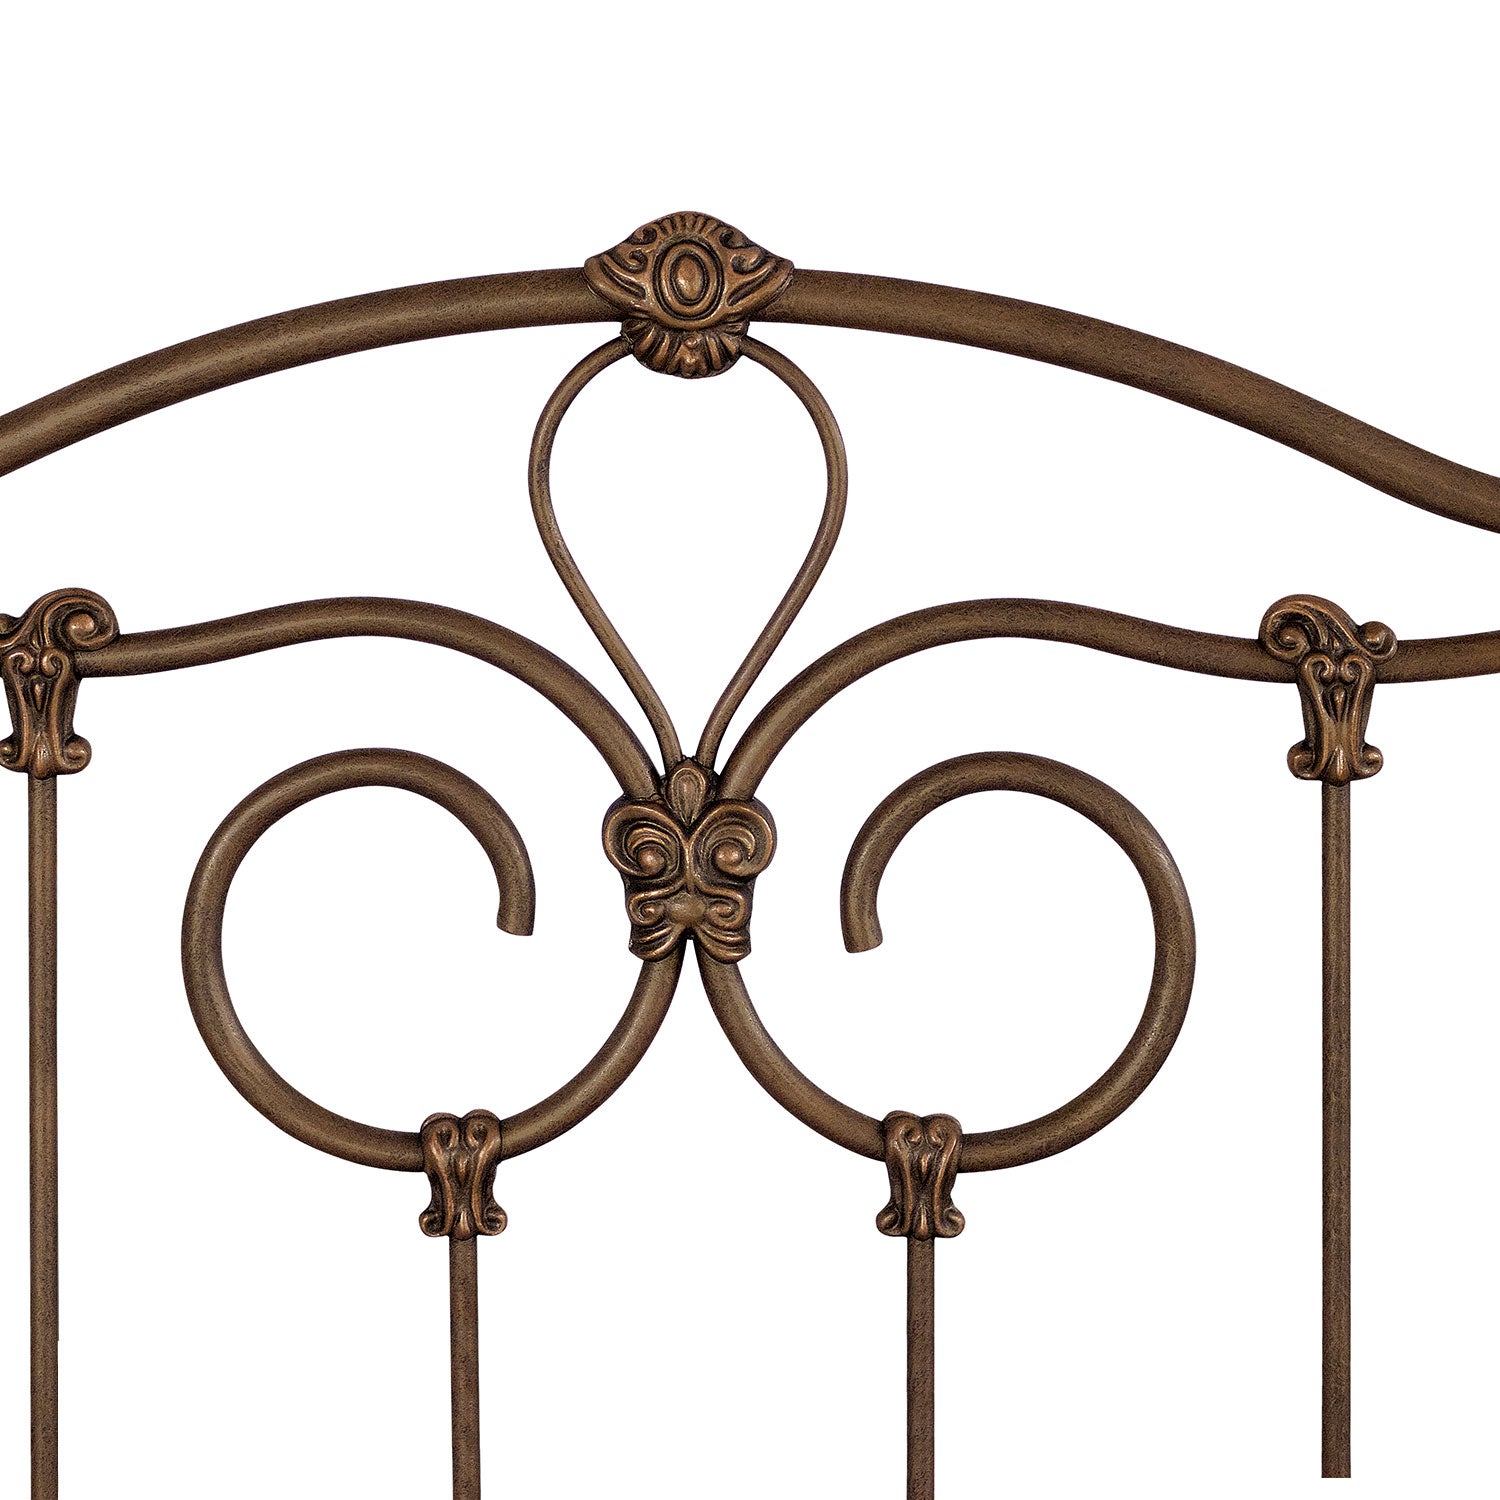 Olympia Cast Iron Bed Frame